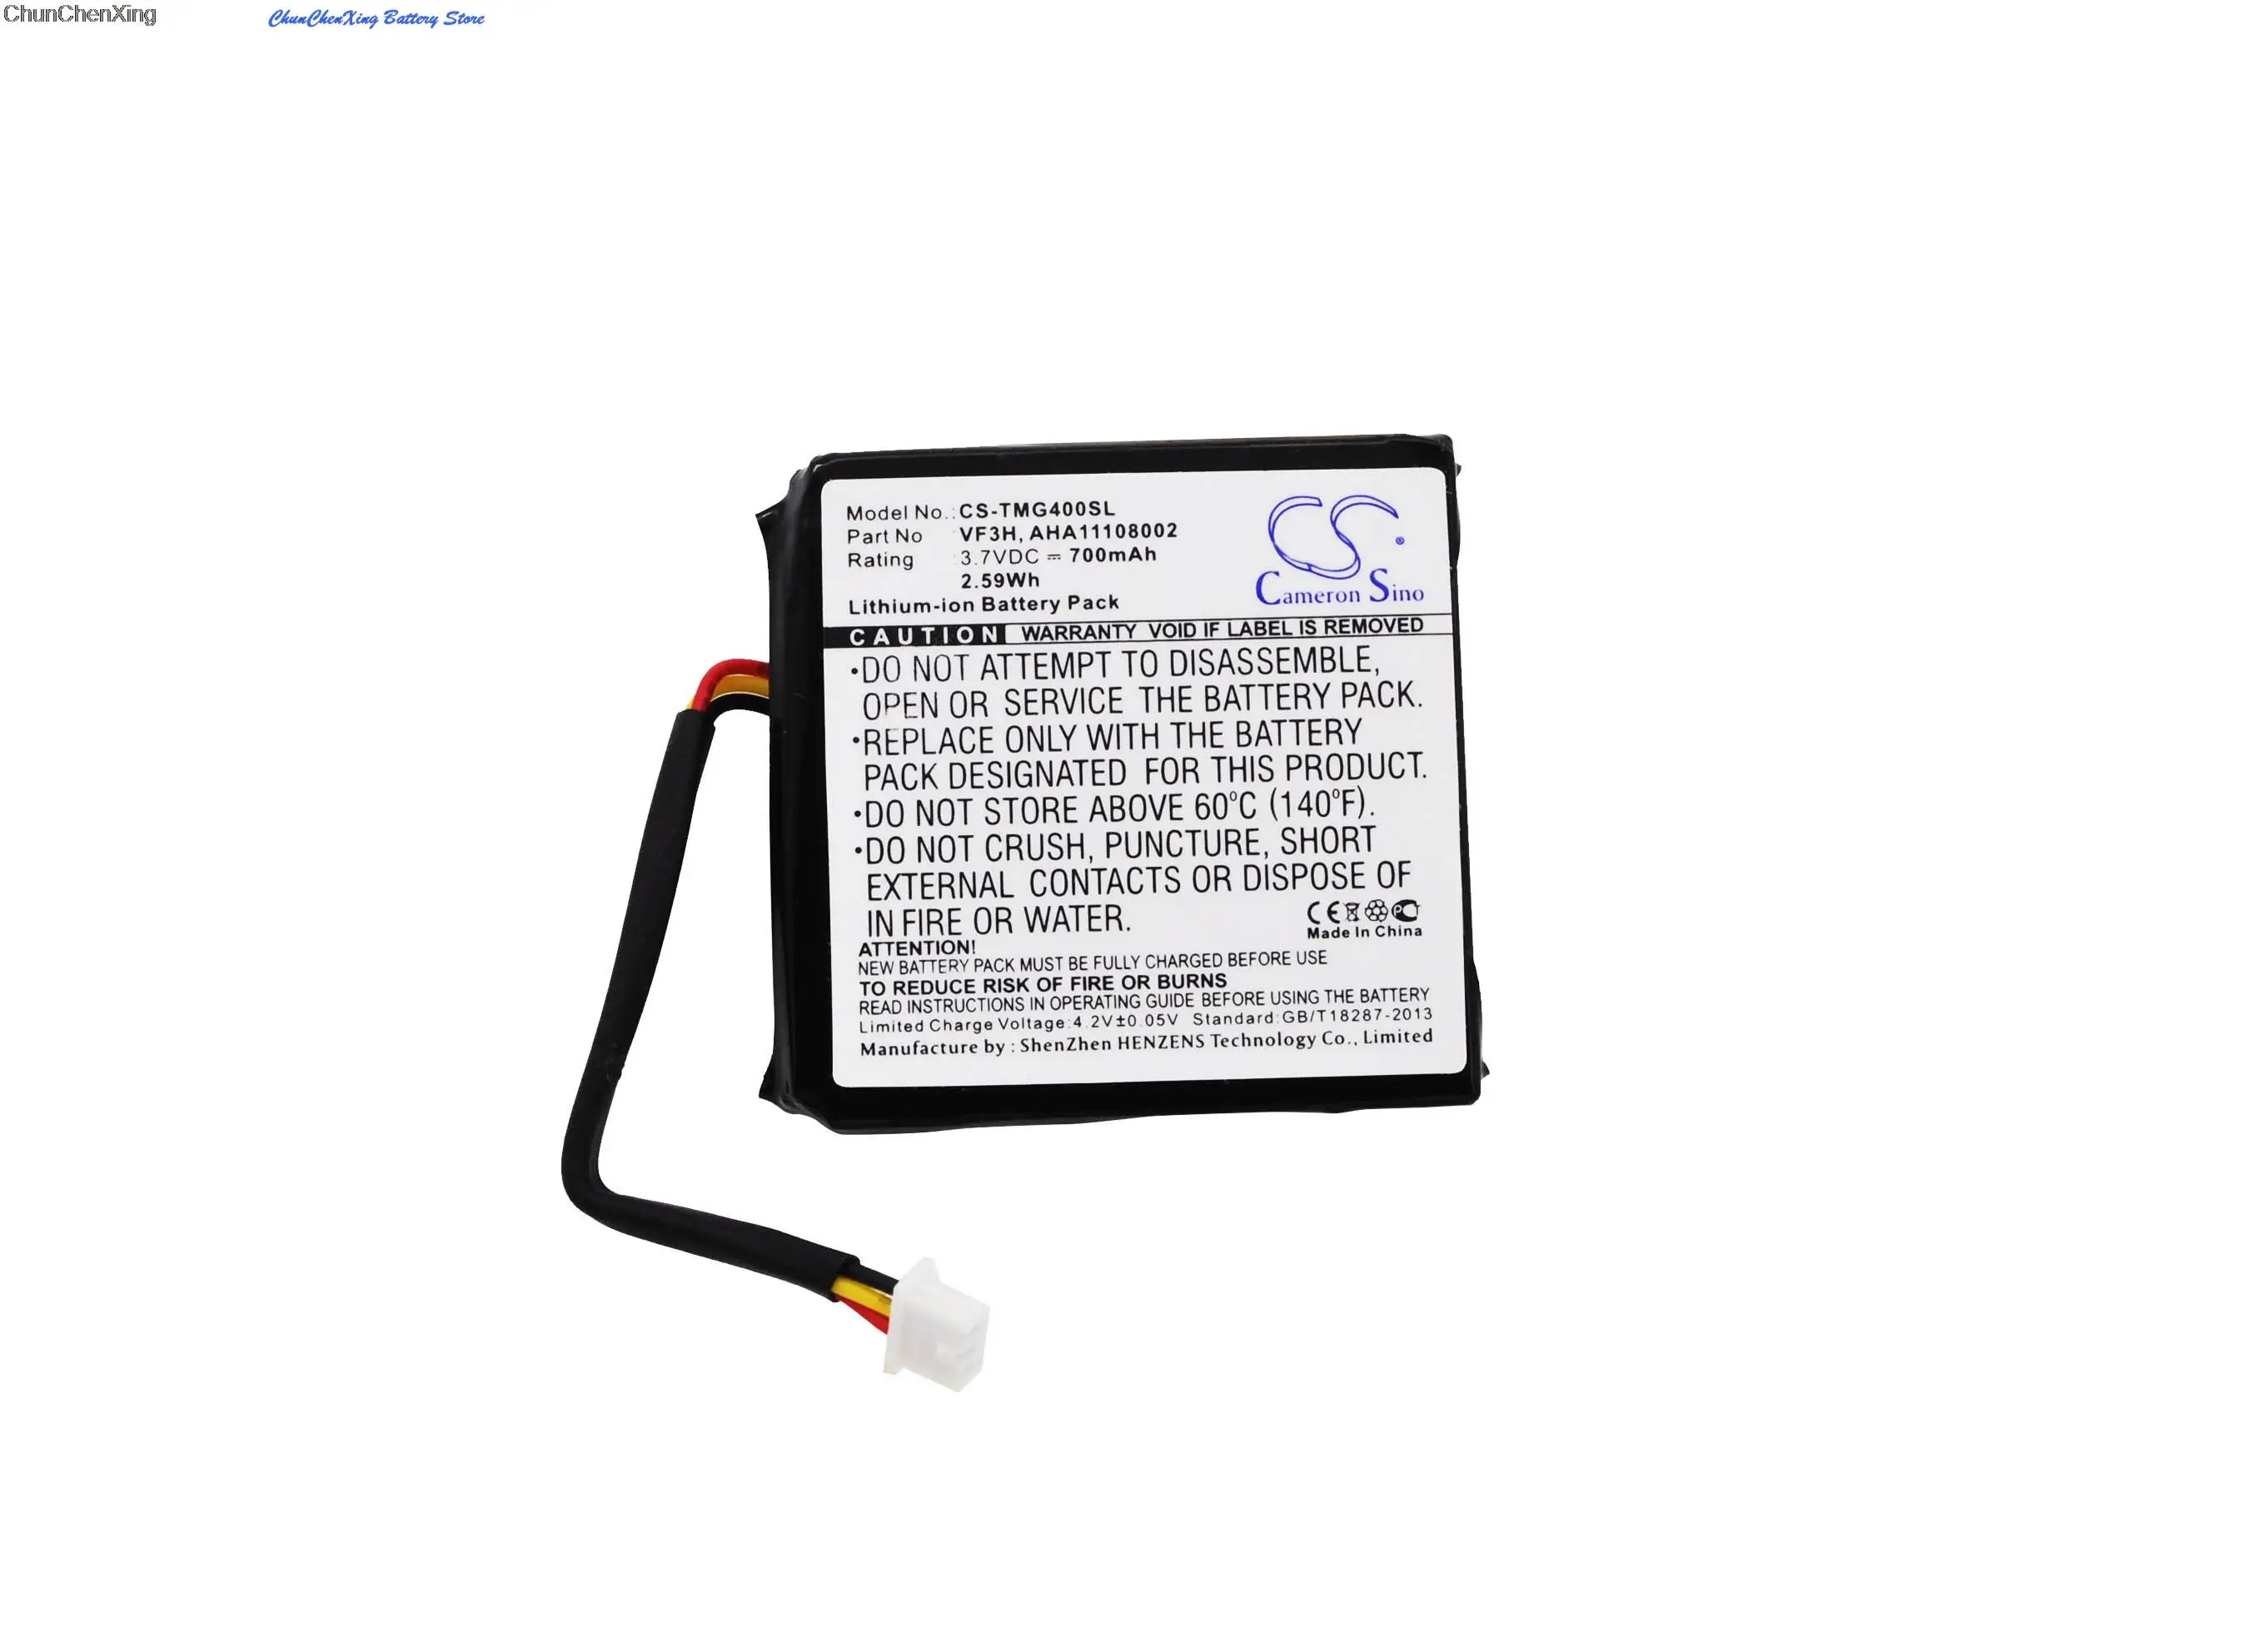 

OrangeYu 700mAh Battery AHA11108002, VF3H for TomTom Go 400 4.3", Go 400 Touch, Please double check the connector